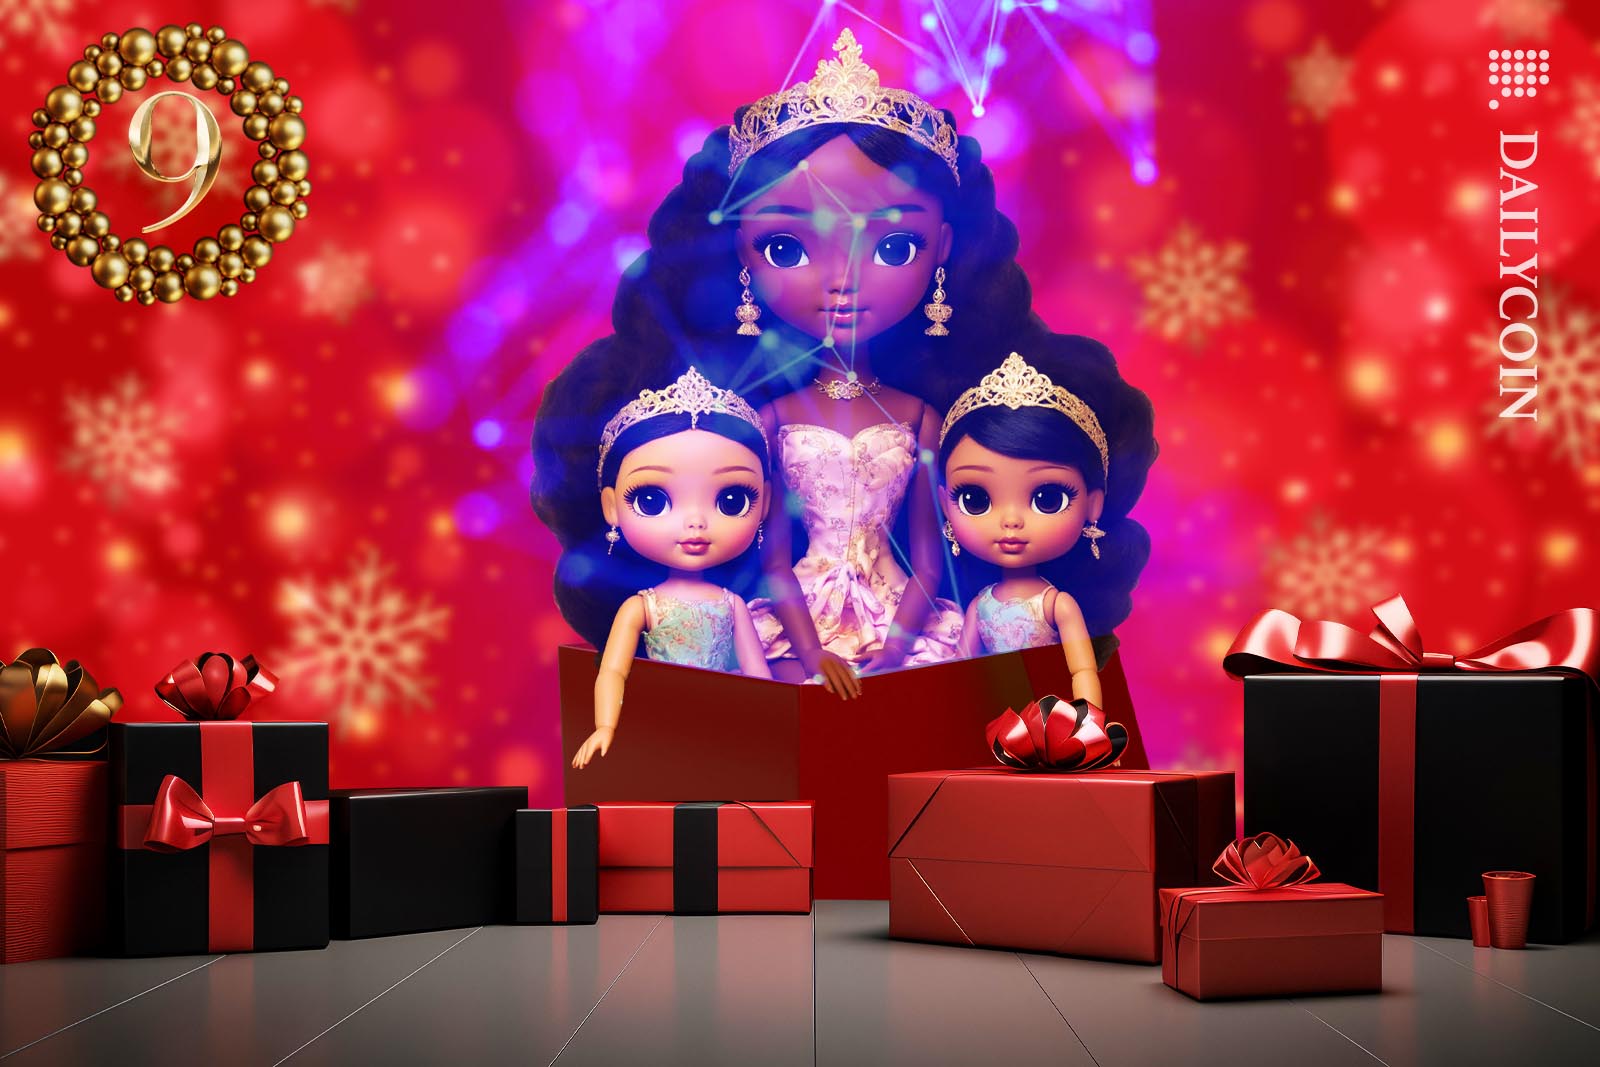 Three dolls sitting in a giftbox surrounded by many presents.